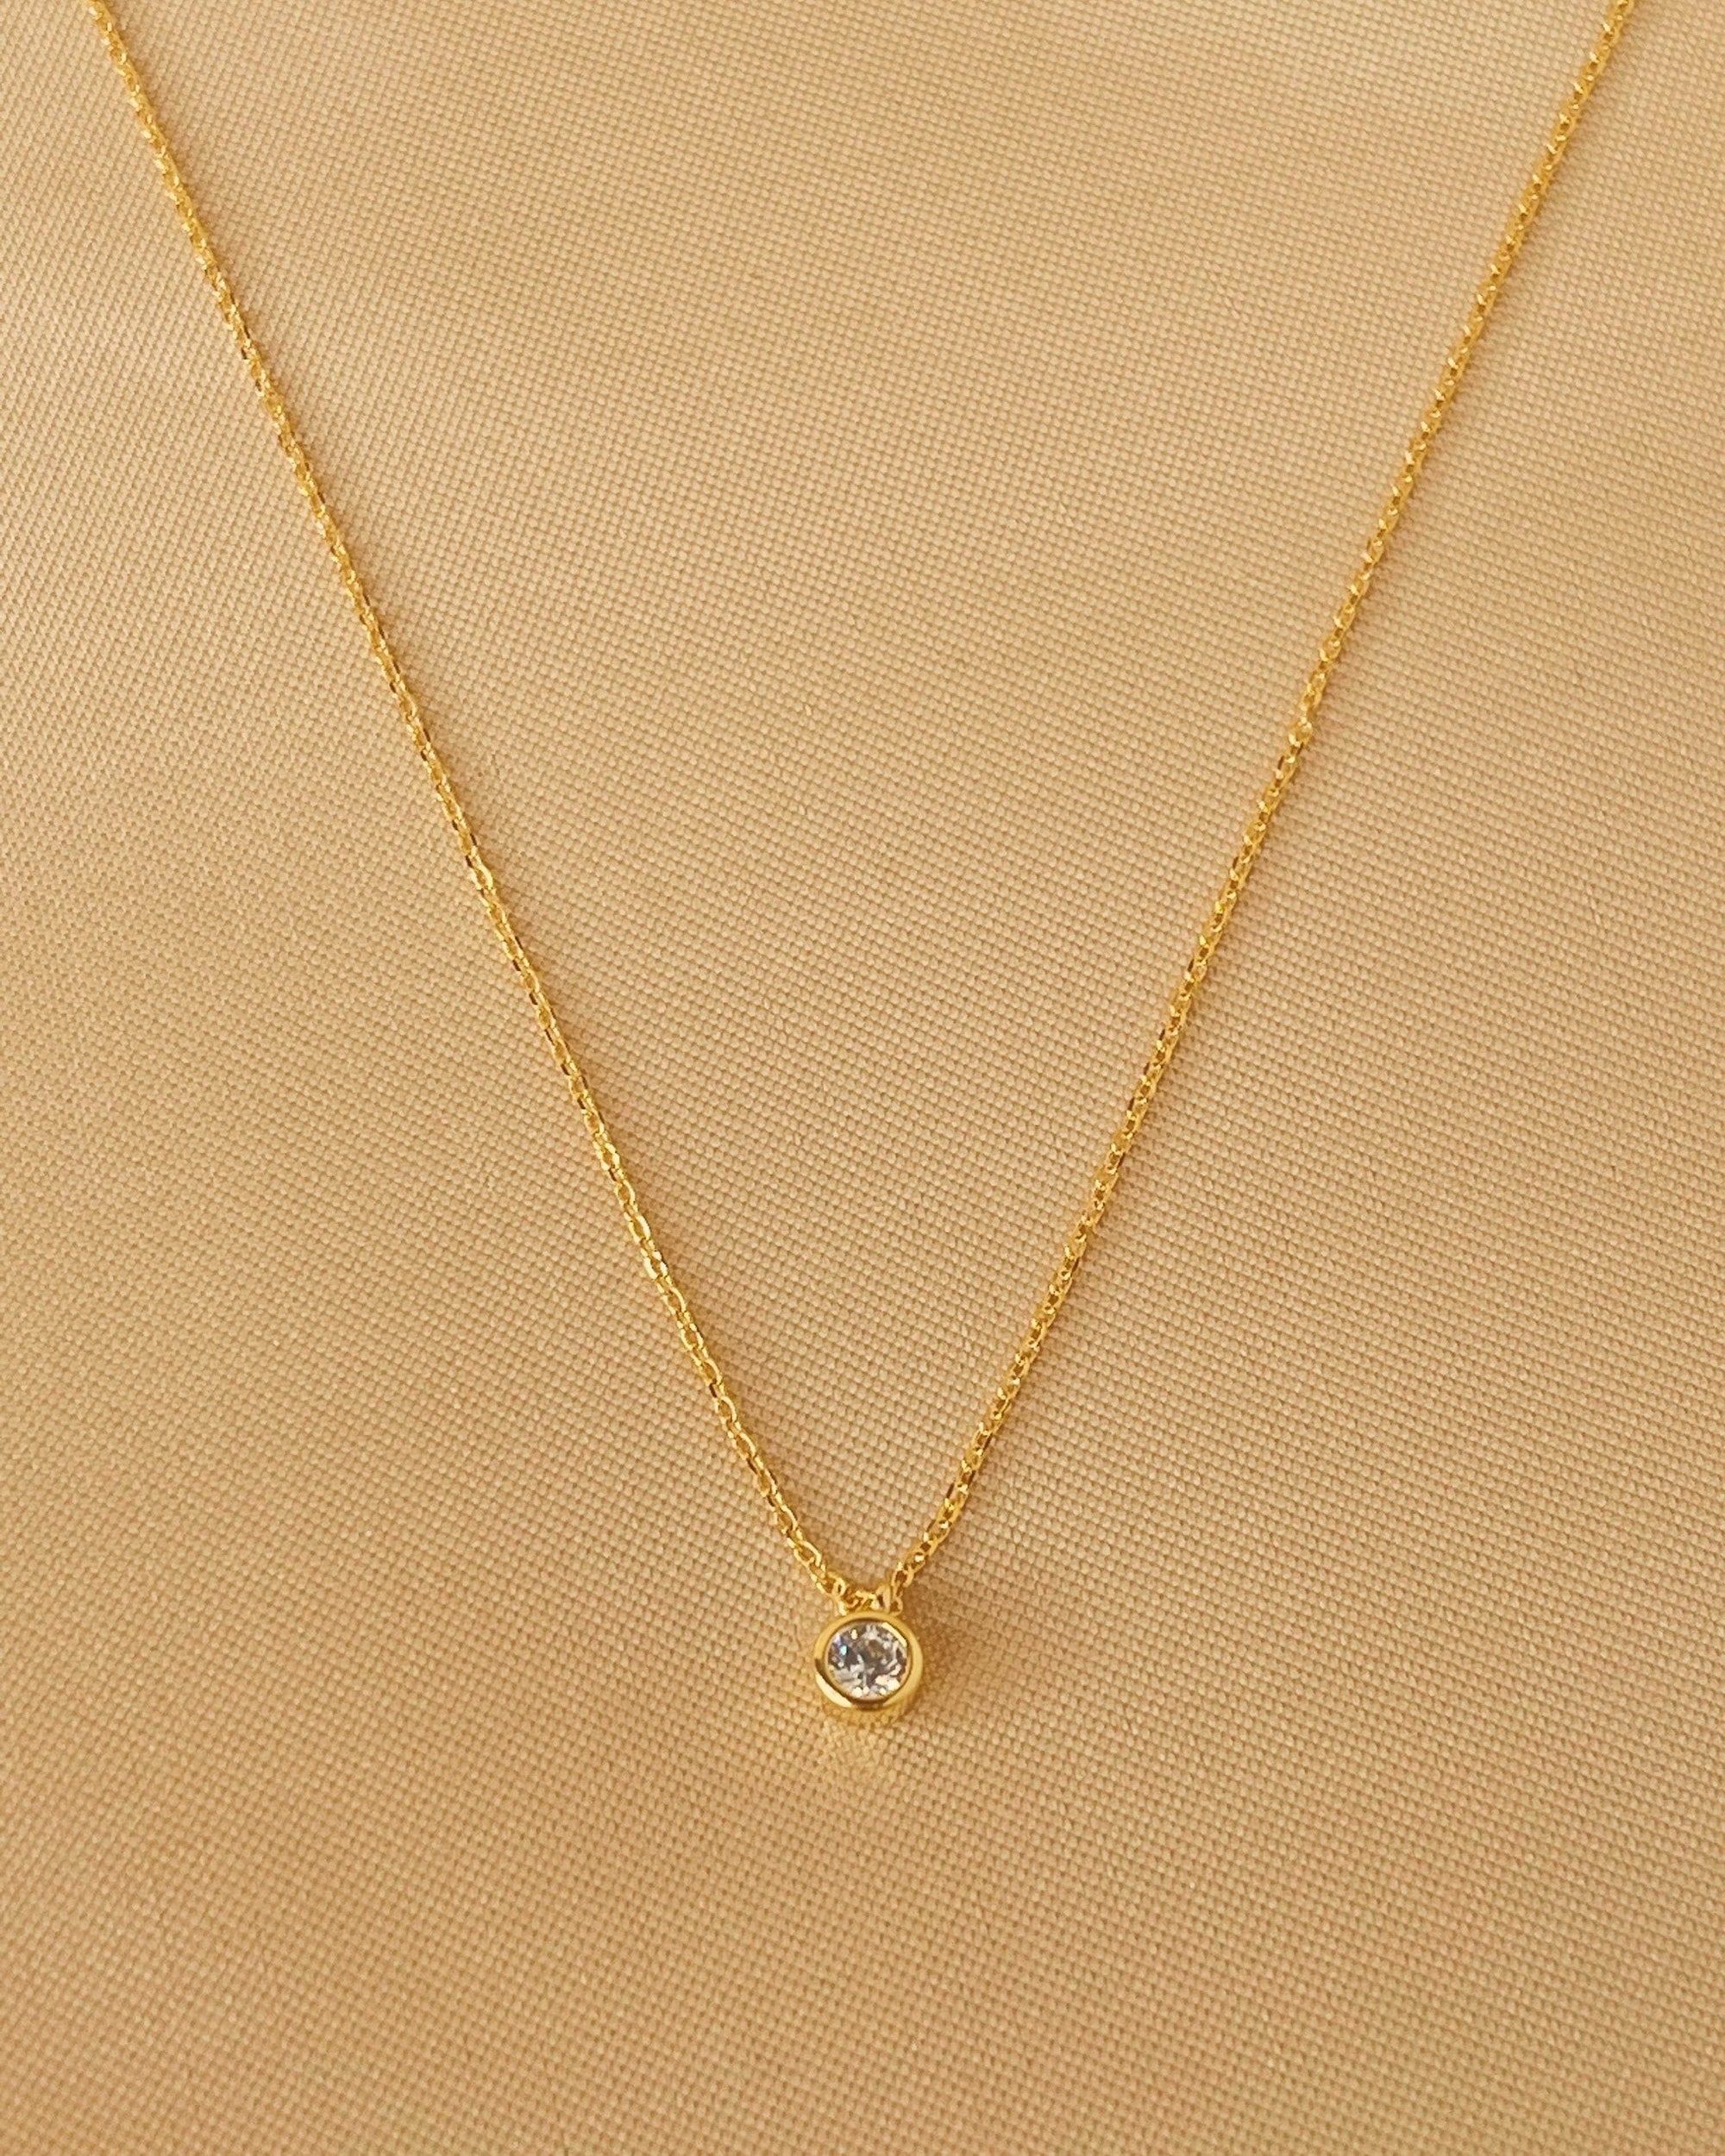 So Dainty Co. Necklaces Millie Gold Necklace Gold Plated 925 Sterling Silver Jewelry